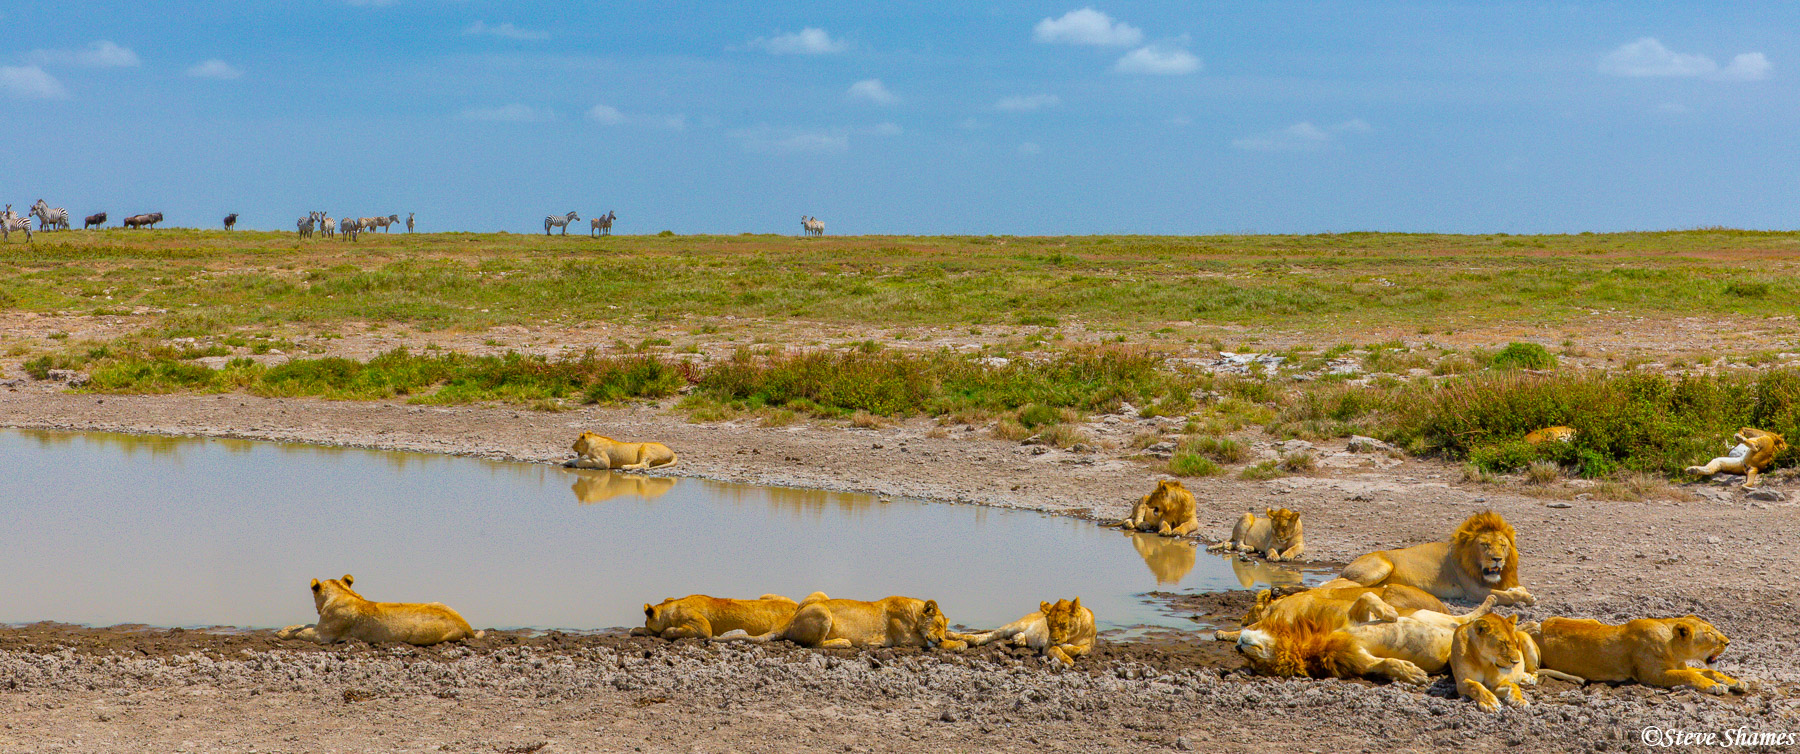 A pride of lions guarding the waterhole. Any animal has to be pretty brave to attempt a drink.